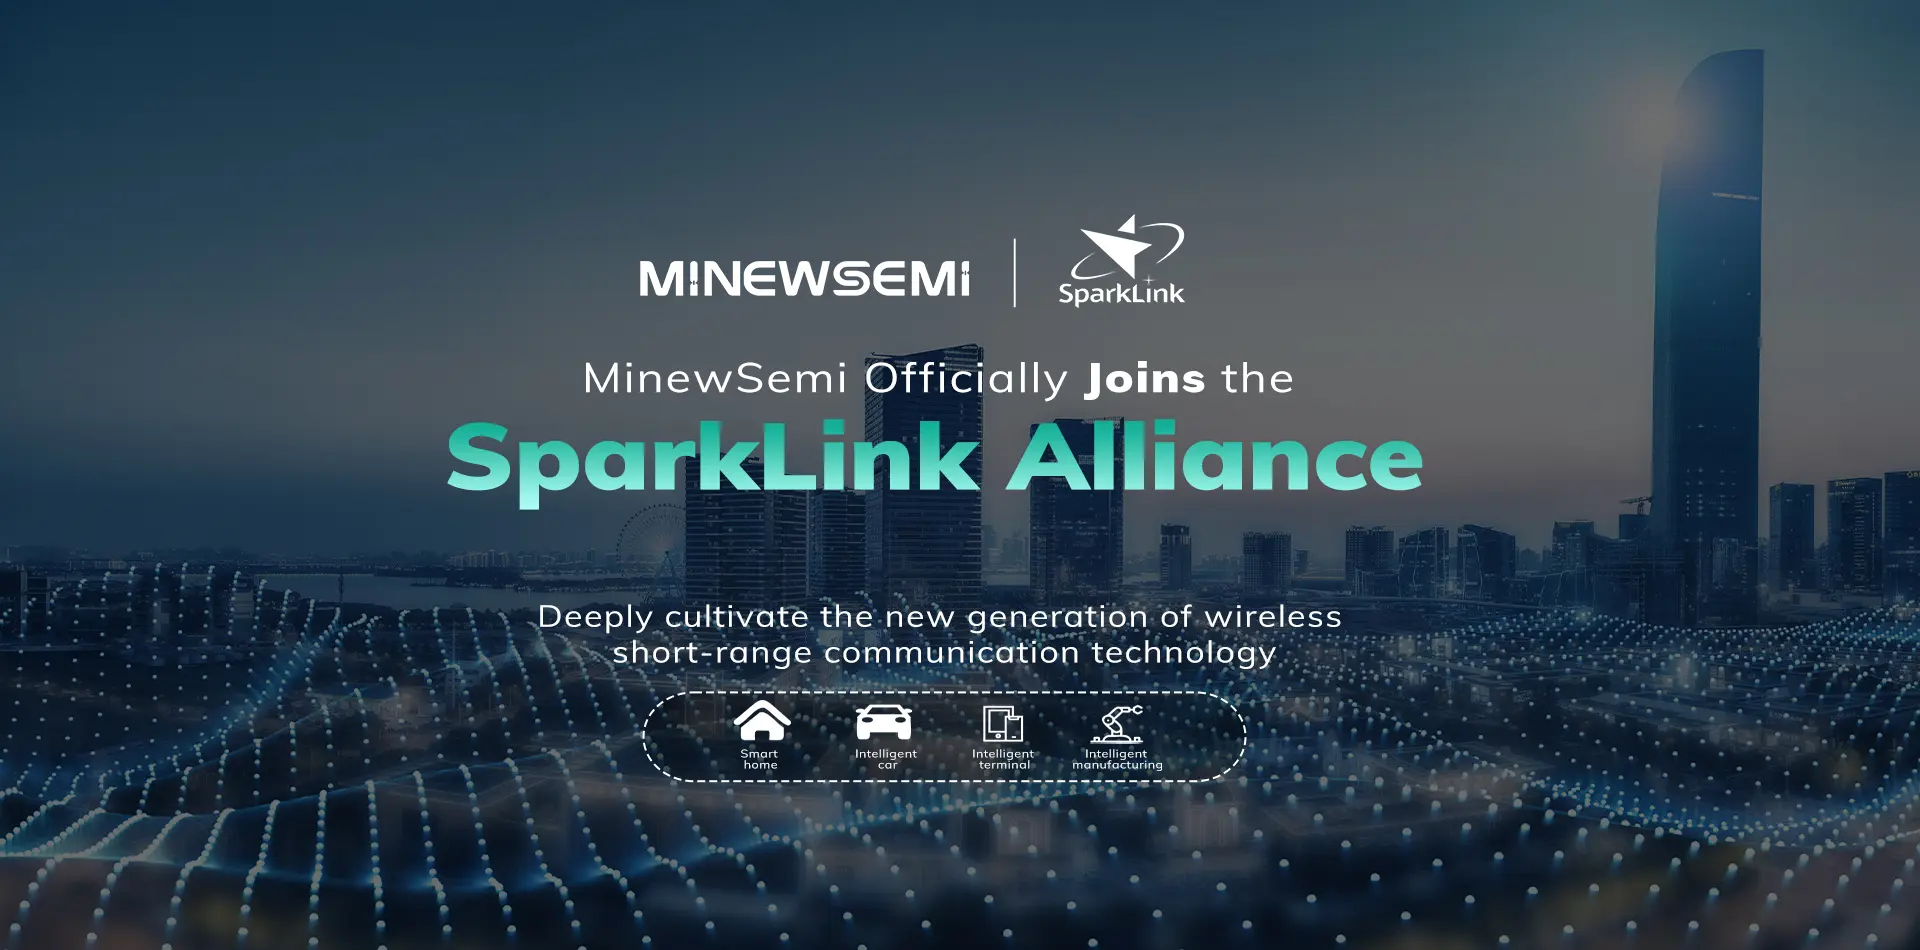 MinewSemi Officially Joins the SparkLink Alliance